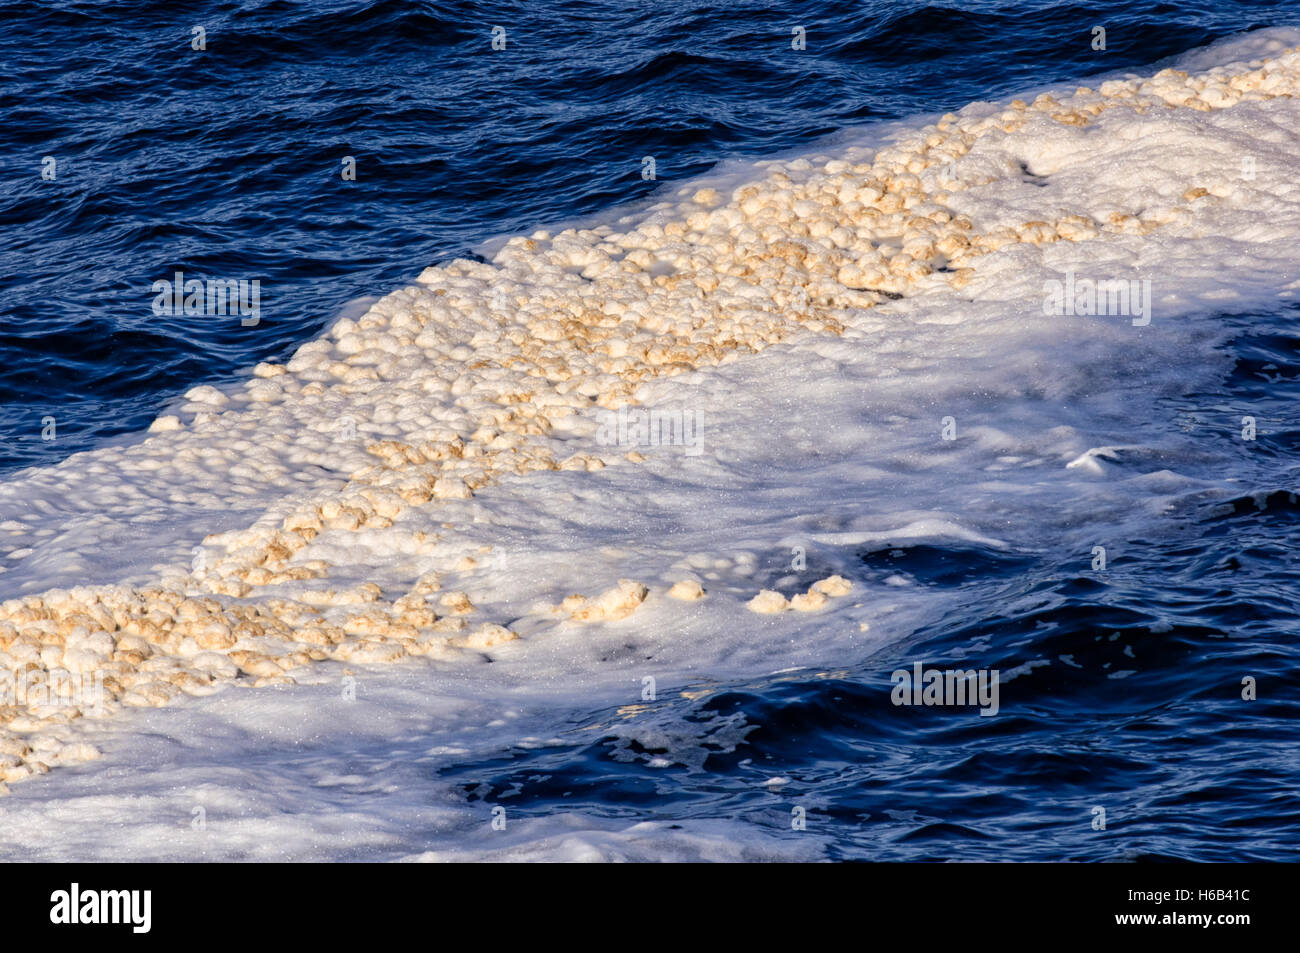 EUROPE, UNITED KINGDOM, UK, SCOTLAND, ORKNEY, Yesnaby, detergent pollution in the sea Stock Photo